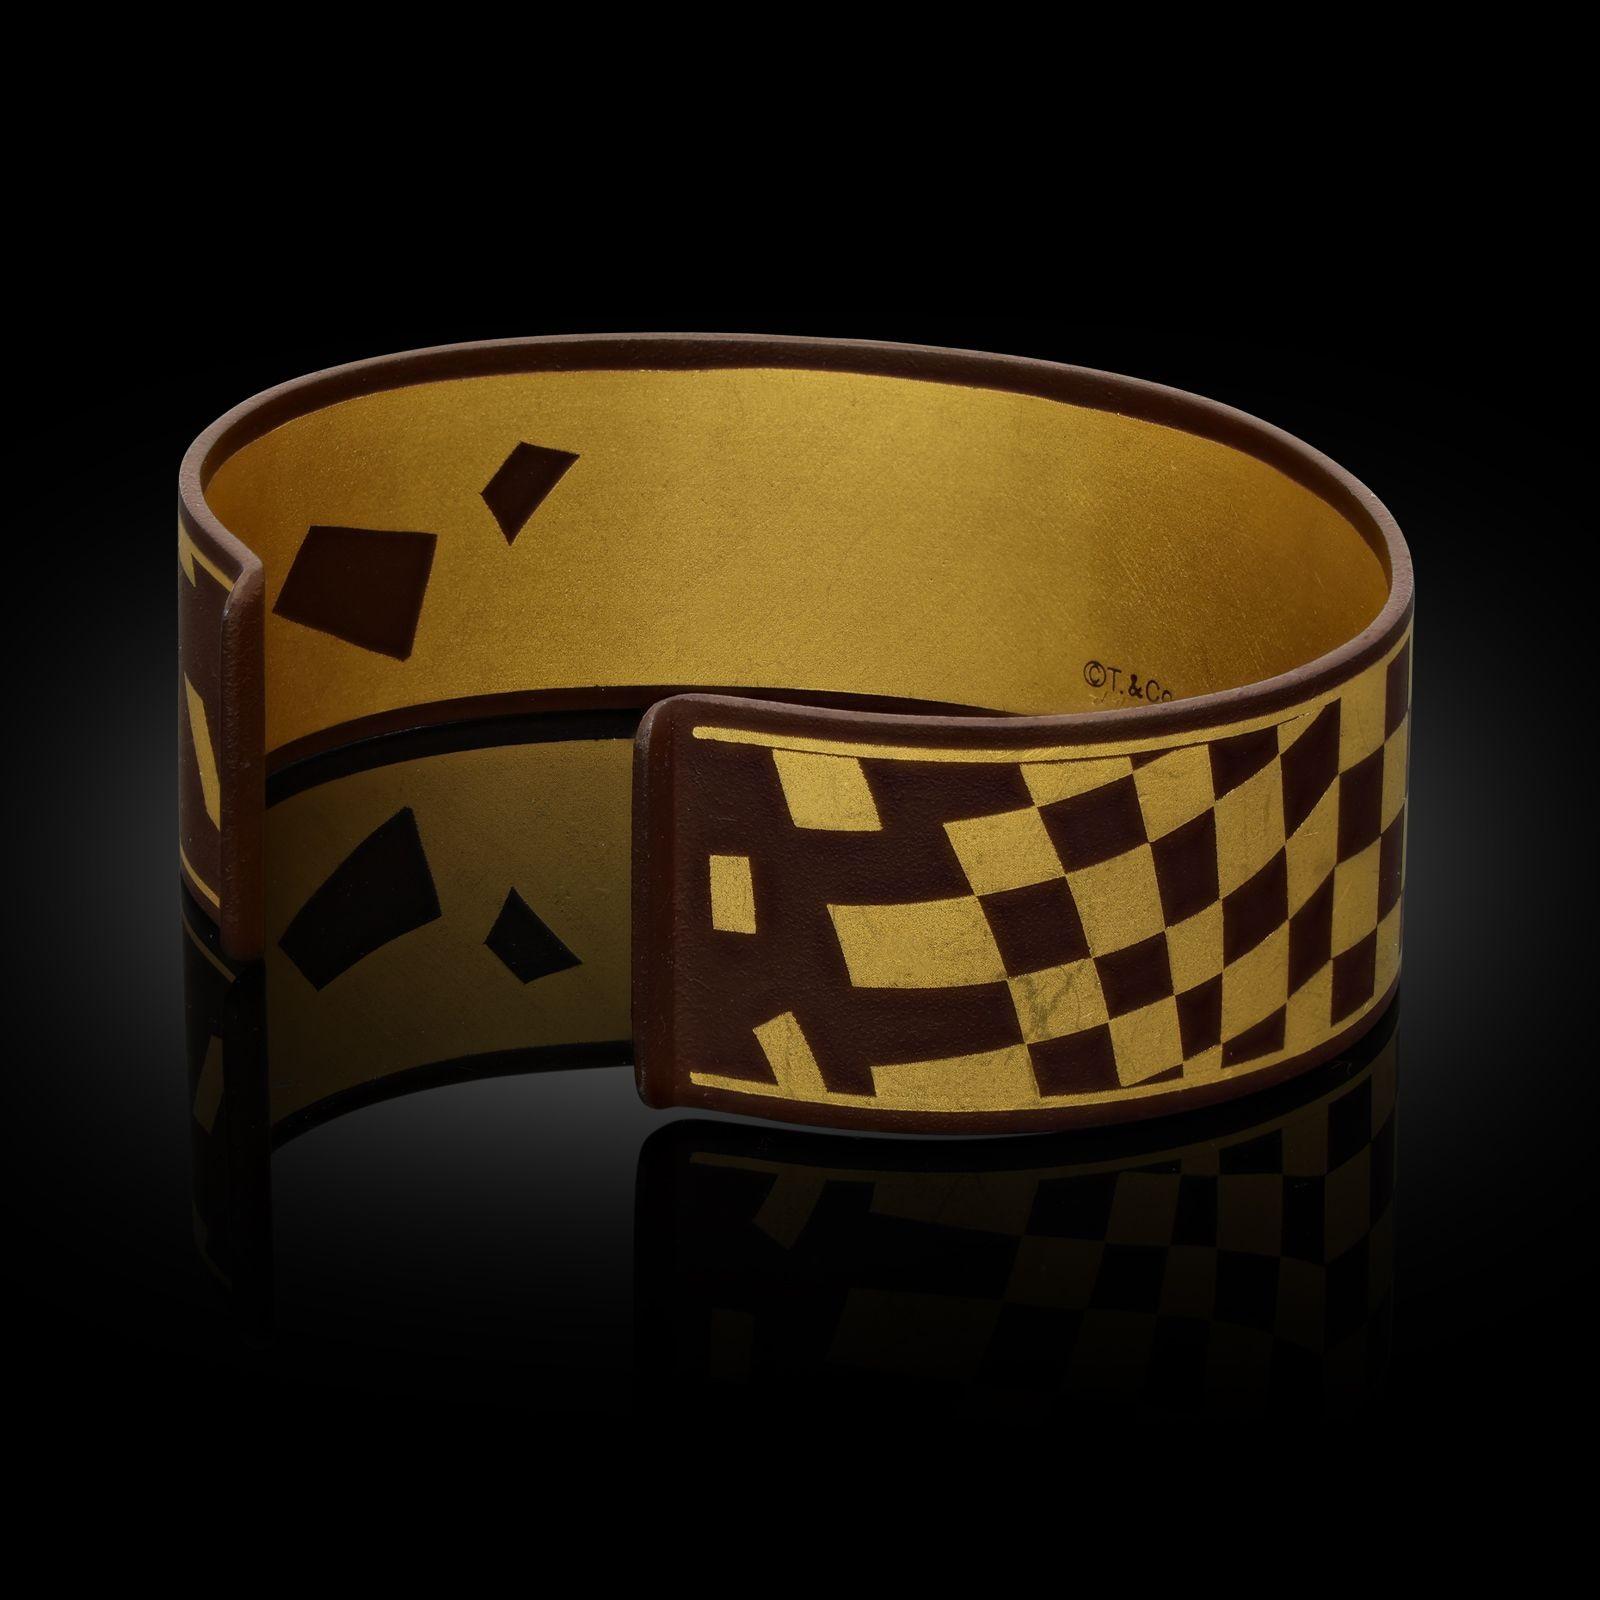 A striking gold, iron and lacquer 'Damascene' cuff bangle designed by Angela Cummings and made by Tiffany & Co. c.1979, the solid cuff measuring 2cm wide with an opening at the back, formed of iron which has been applied with a rich brown lacquer